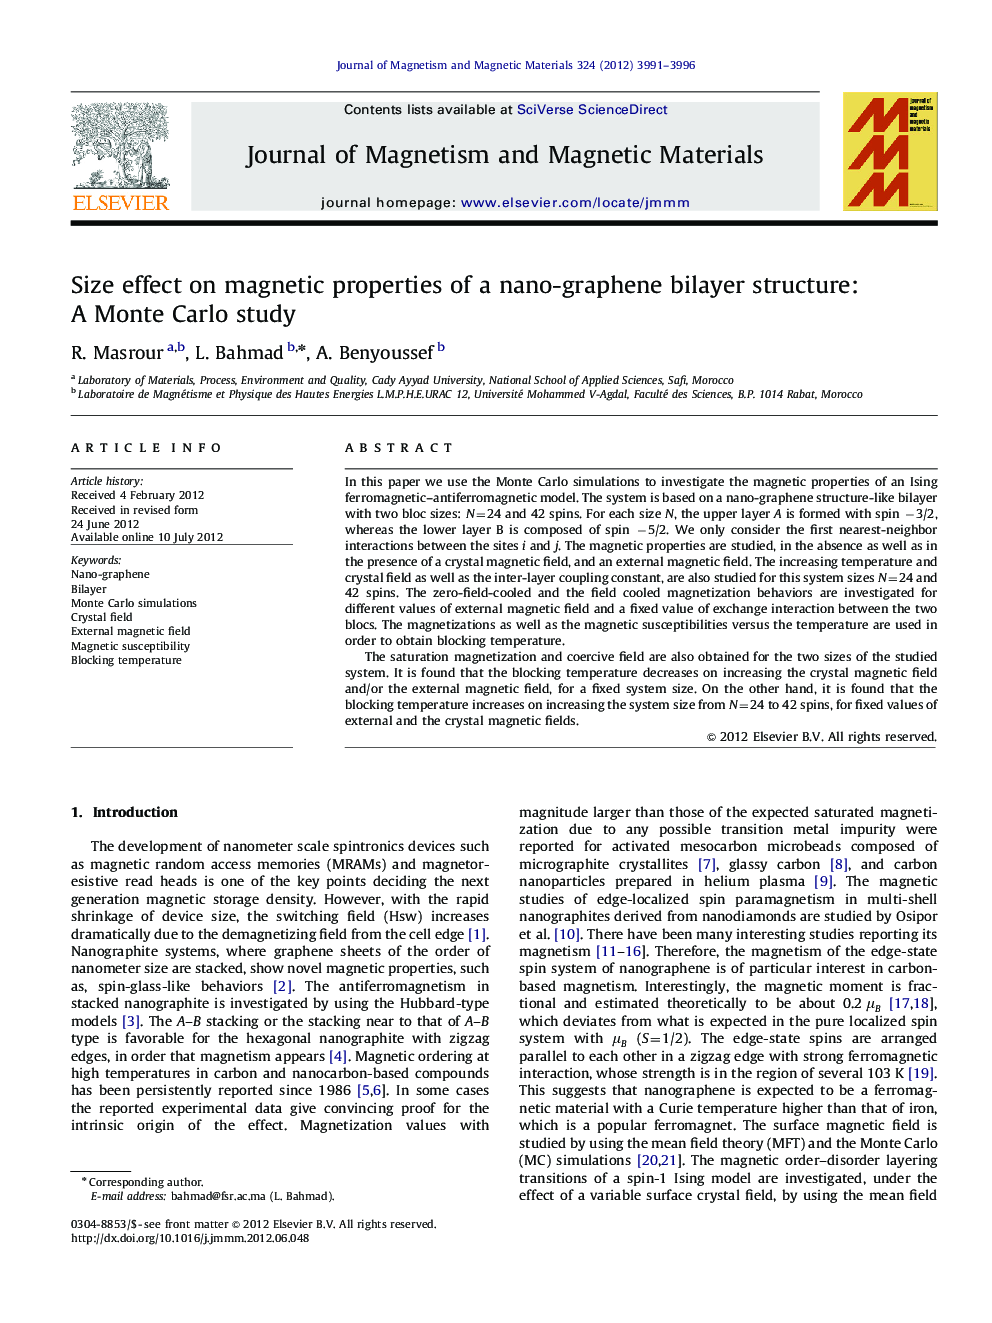 Size effect on magnetic properties of a nano-graphene bilayer structure: A Monte Carlo study